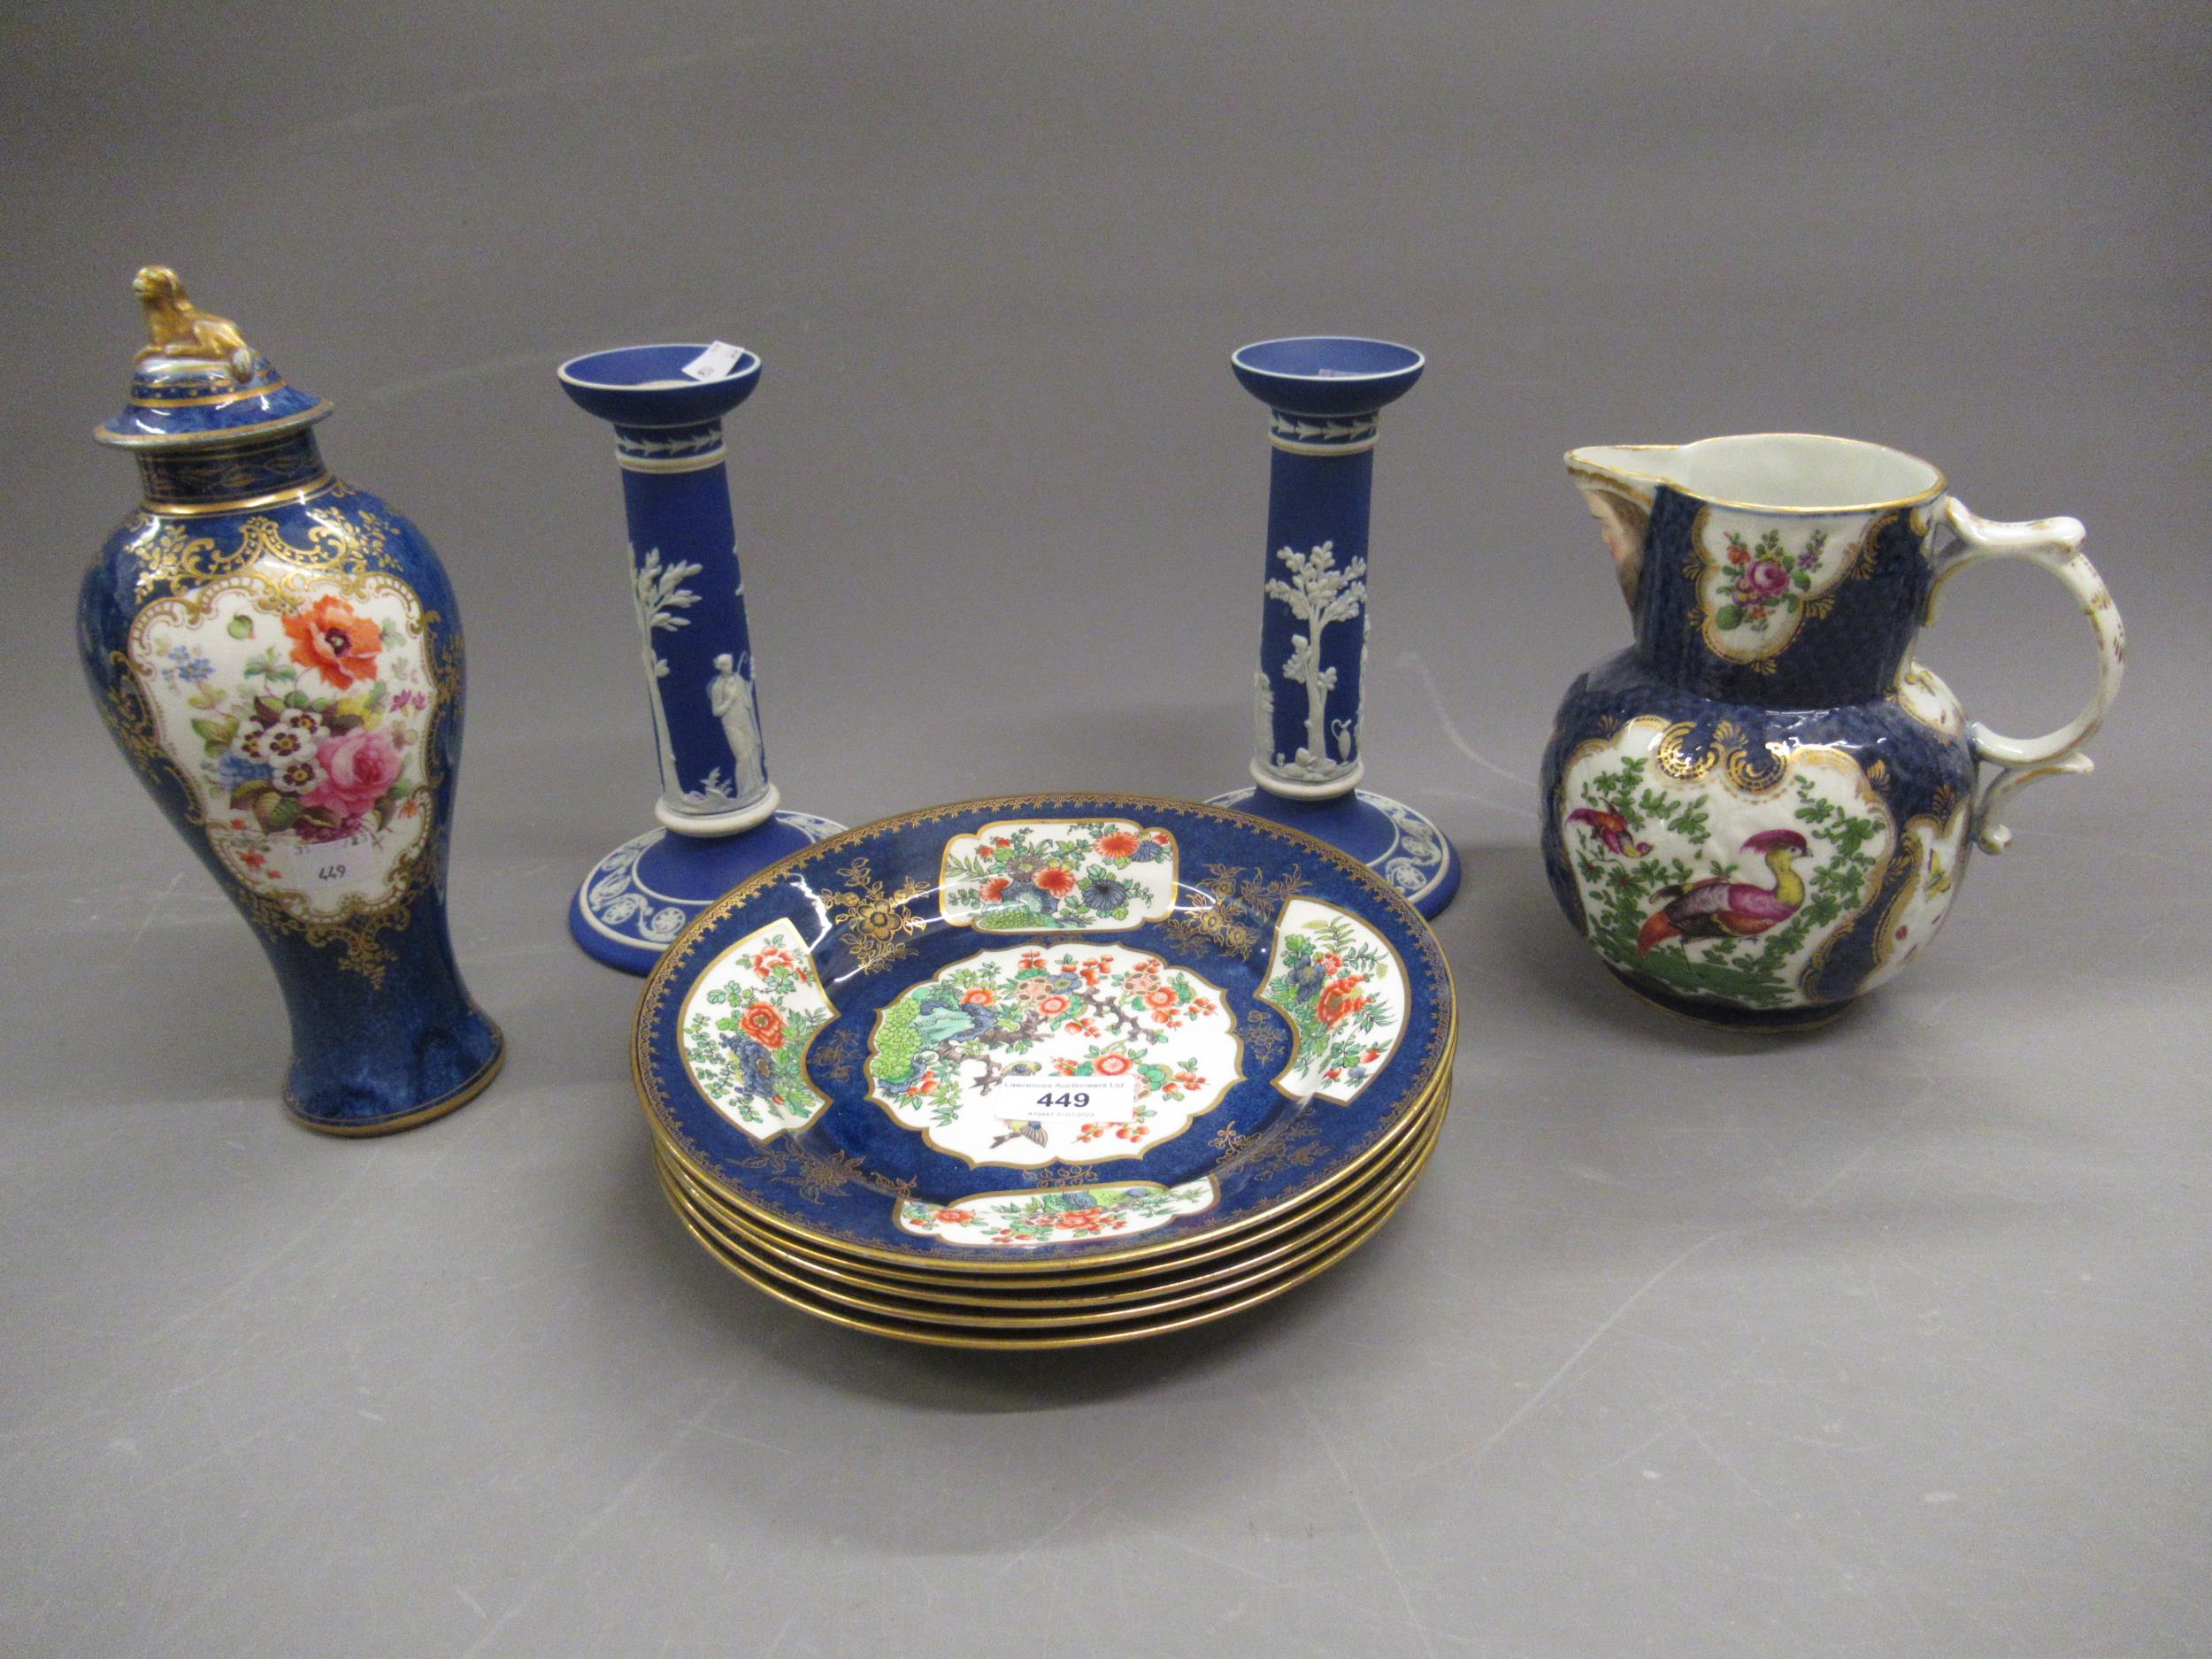 Pair of Wedgwood blue jasperware candlesticks, 20cms high together with a Booths Kakiemon design